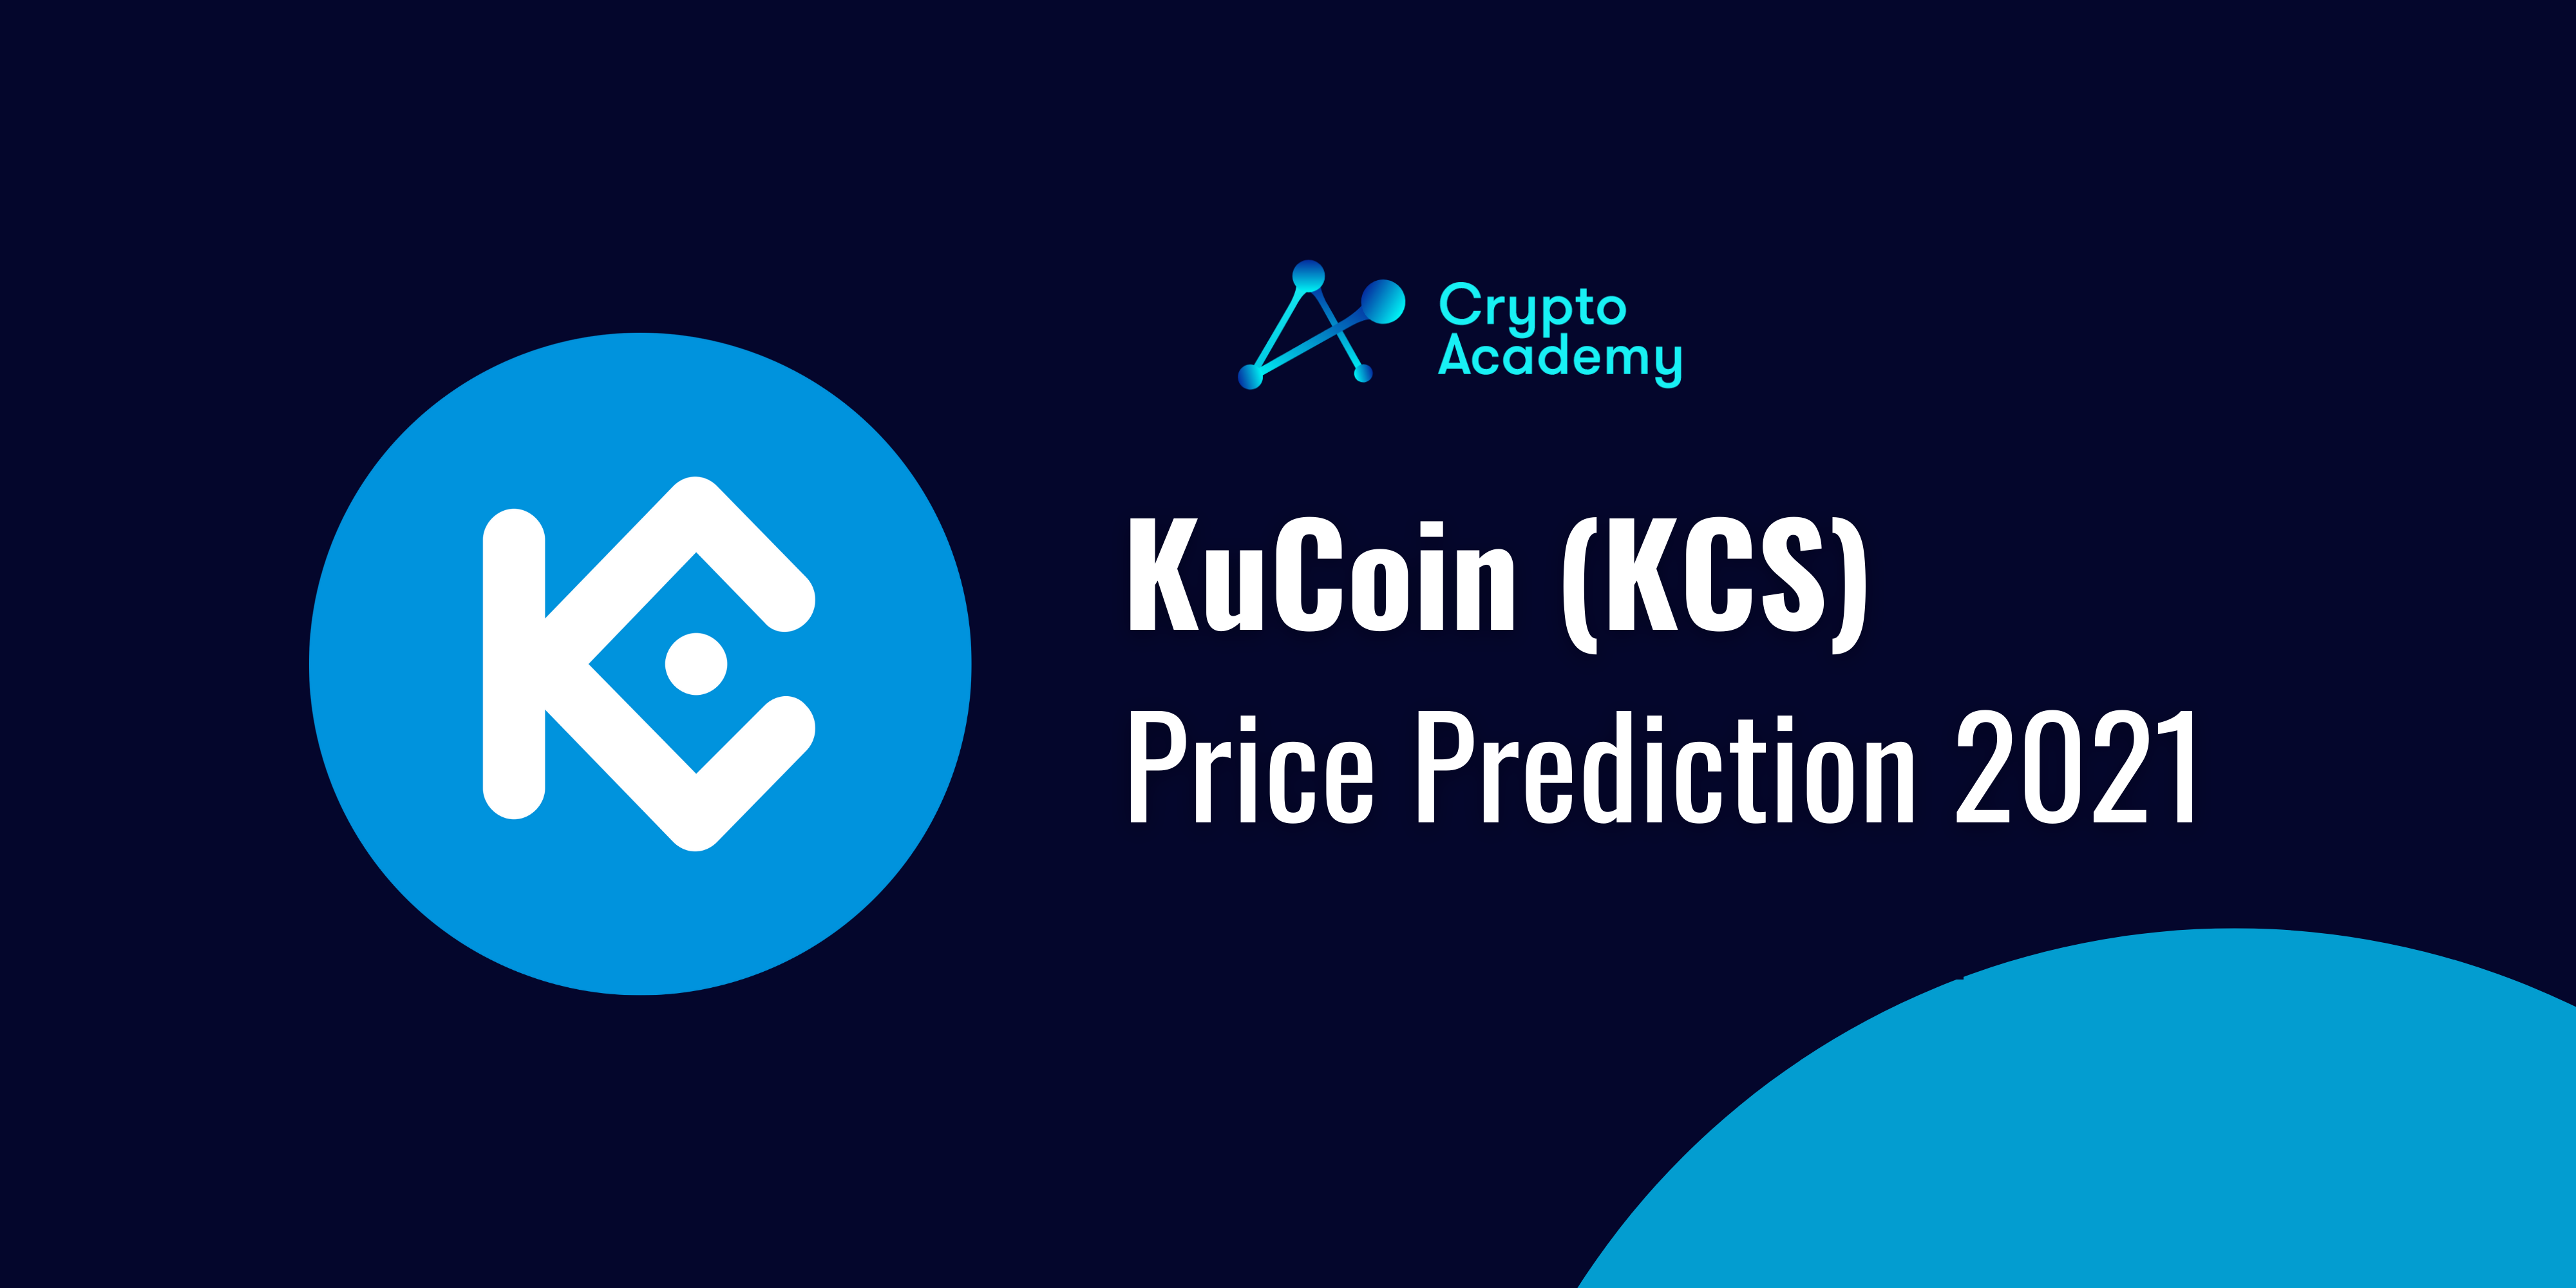 KuCoin (KCS) Price Prediction 2021 and Beyond – Will KCS Reach $100 in 2021?